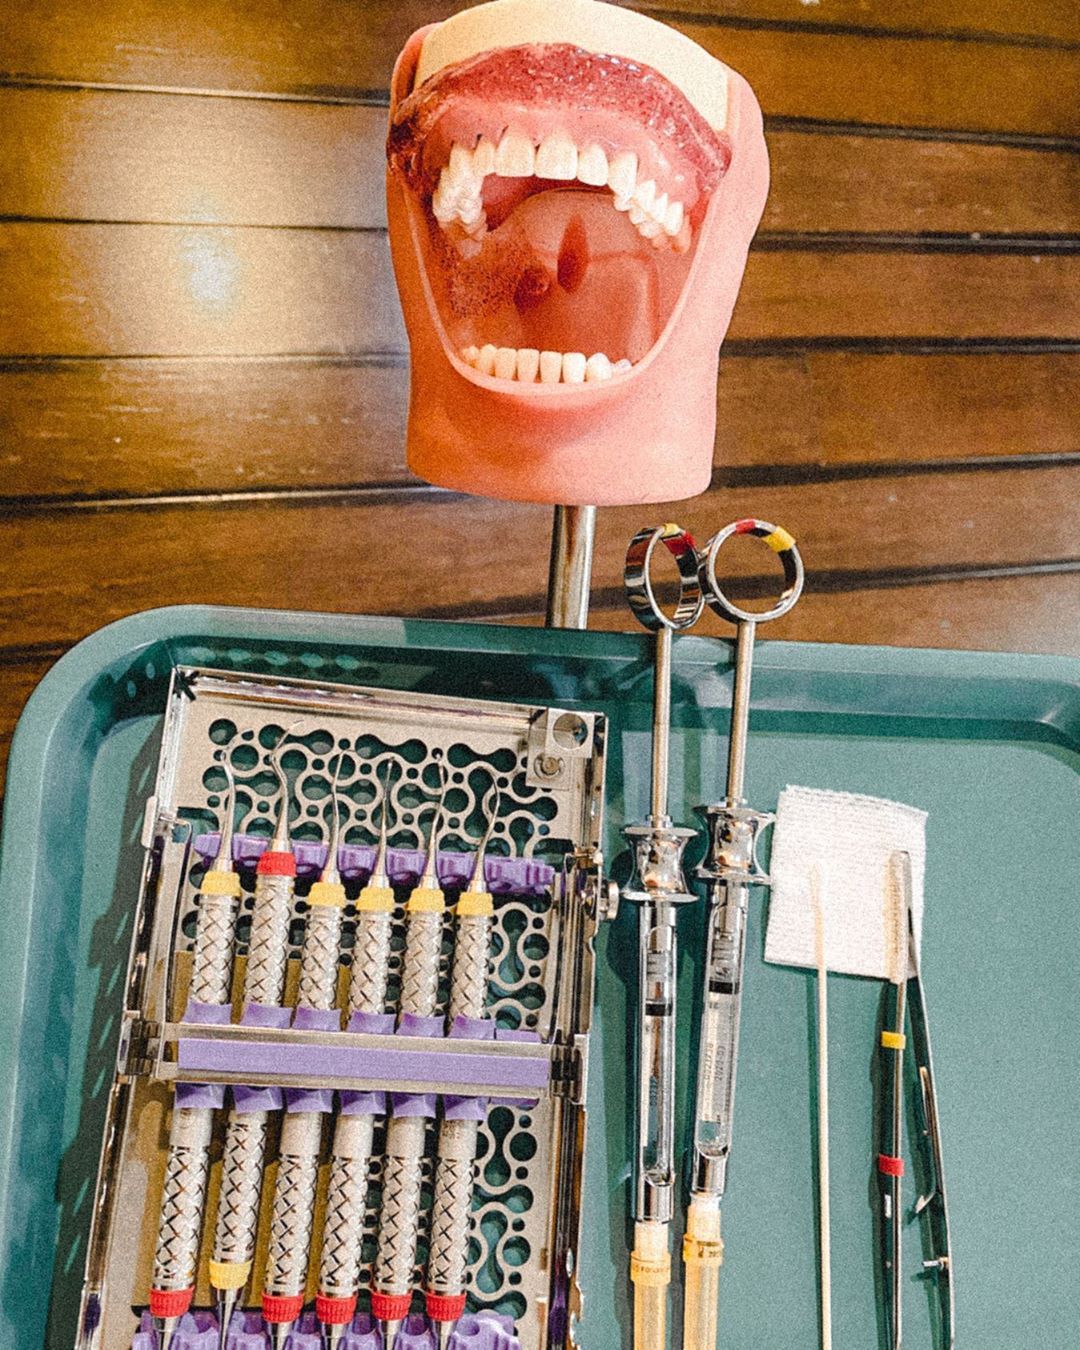 A tray with dental tools and mouth parts - Dentist